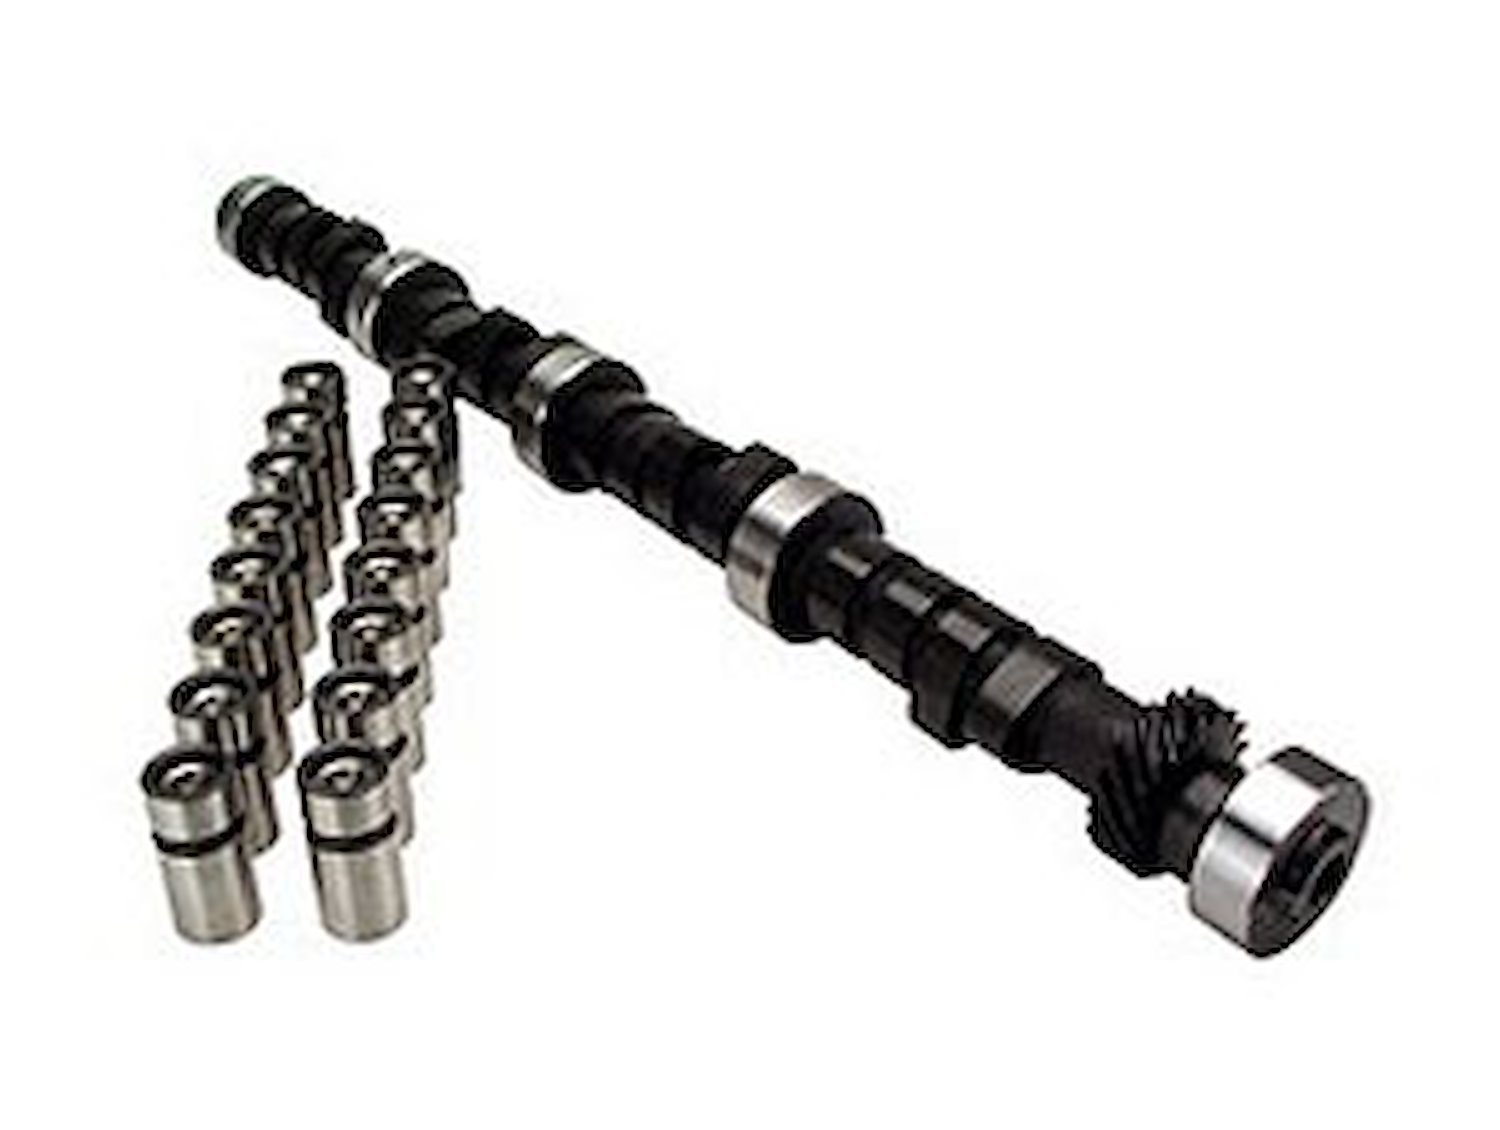 Xtreme Energy 250H Hydraulic Flat Tappet Camshaft & Lifter Kit Lift .432"/.444" Duration 250°/260° RPM Range 600-4800